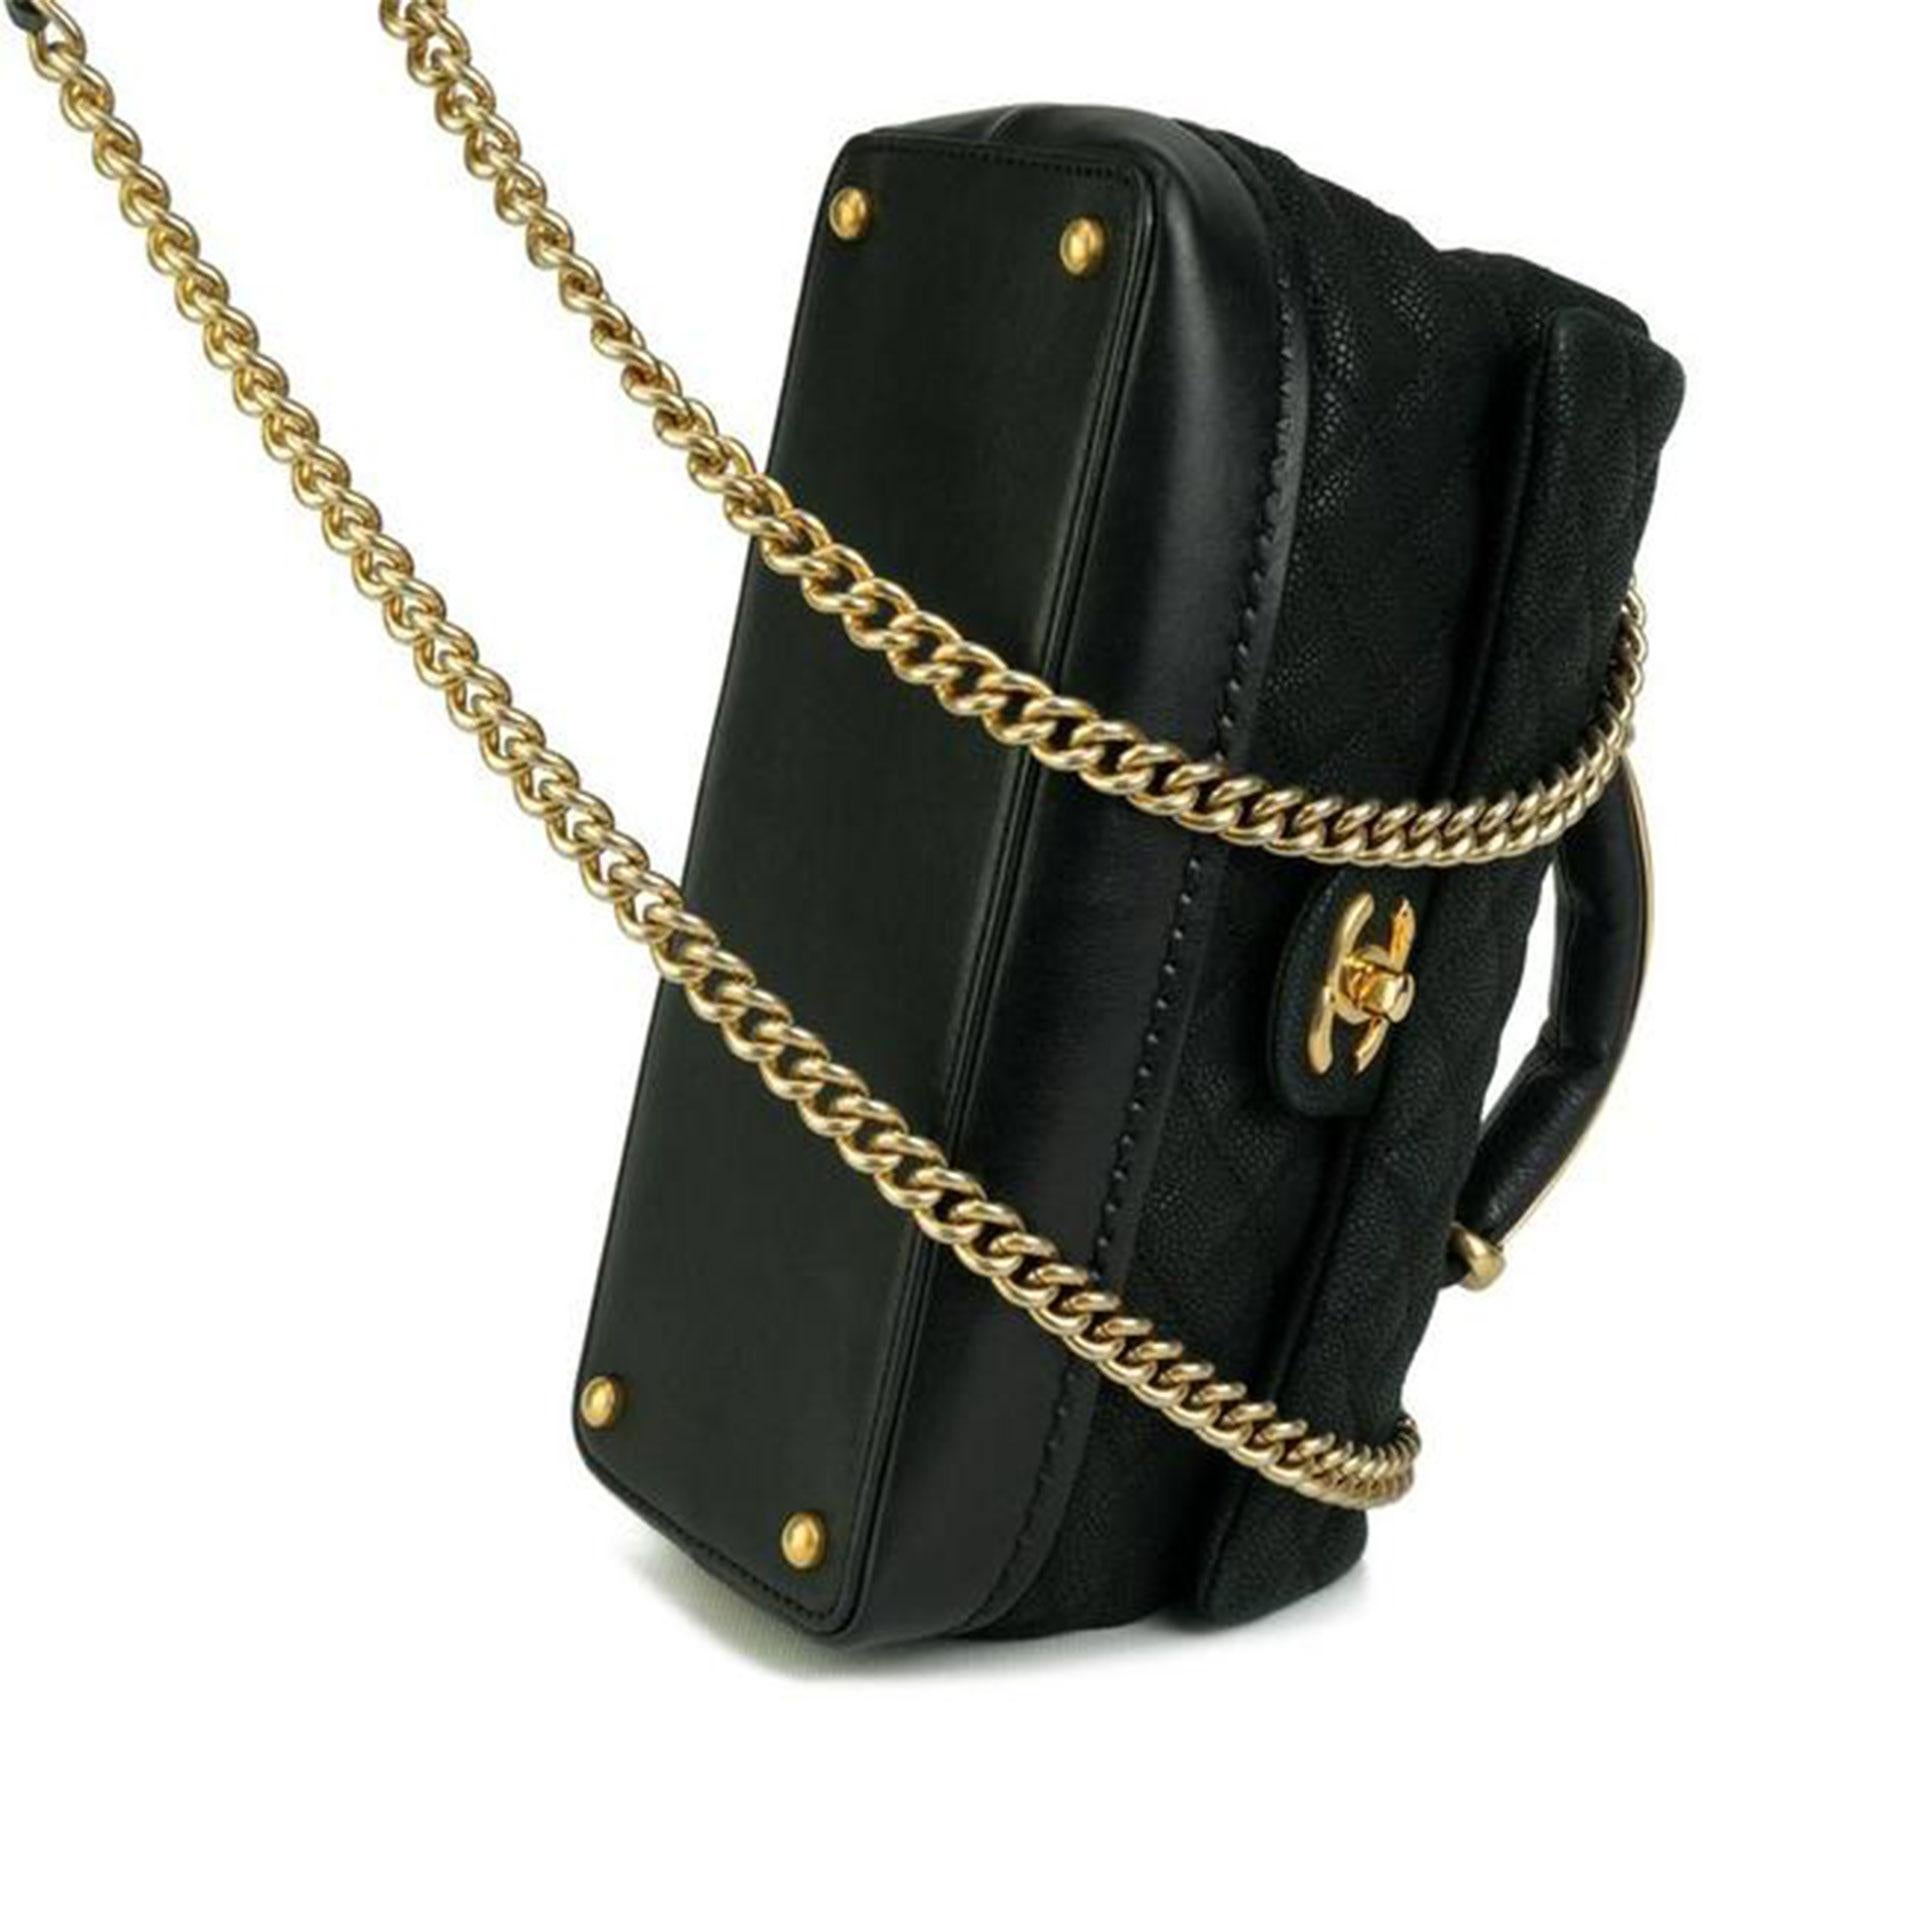 Chanel 2013 Cruise Iridescent Caviar Kelly Top Handle Crossbody Classic Flap Bag For Sale 4